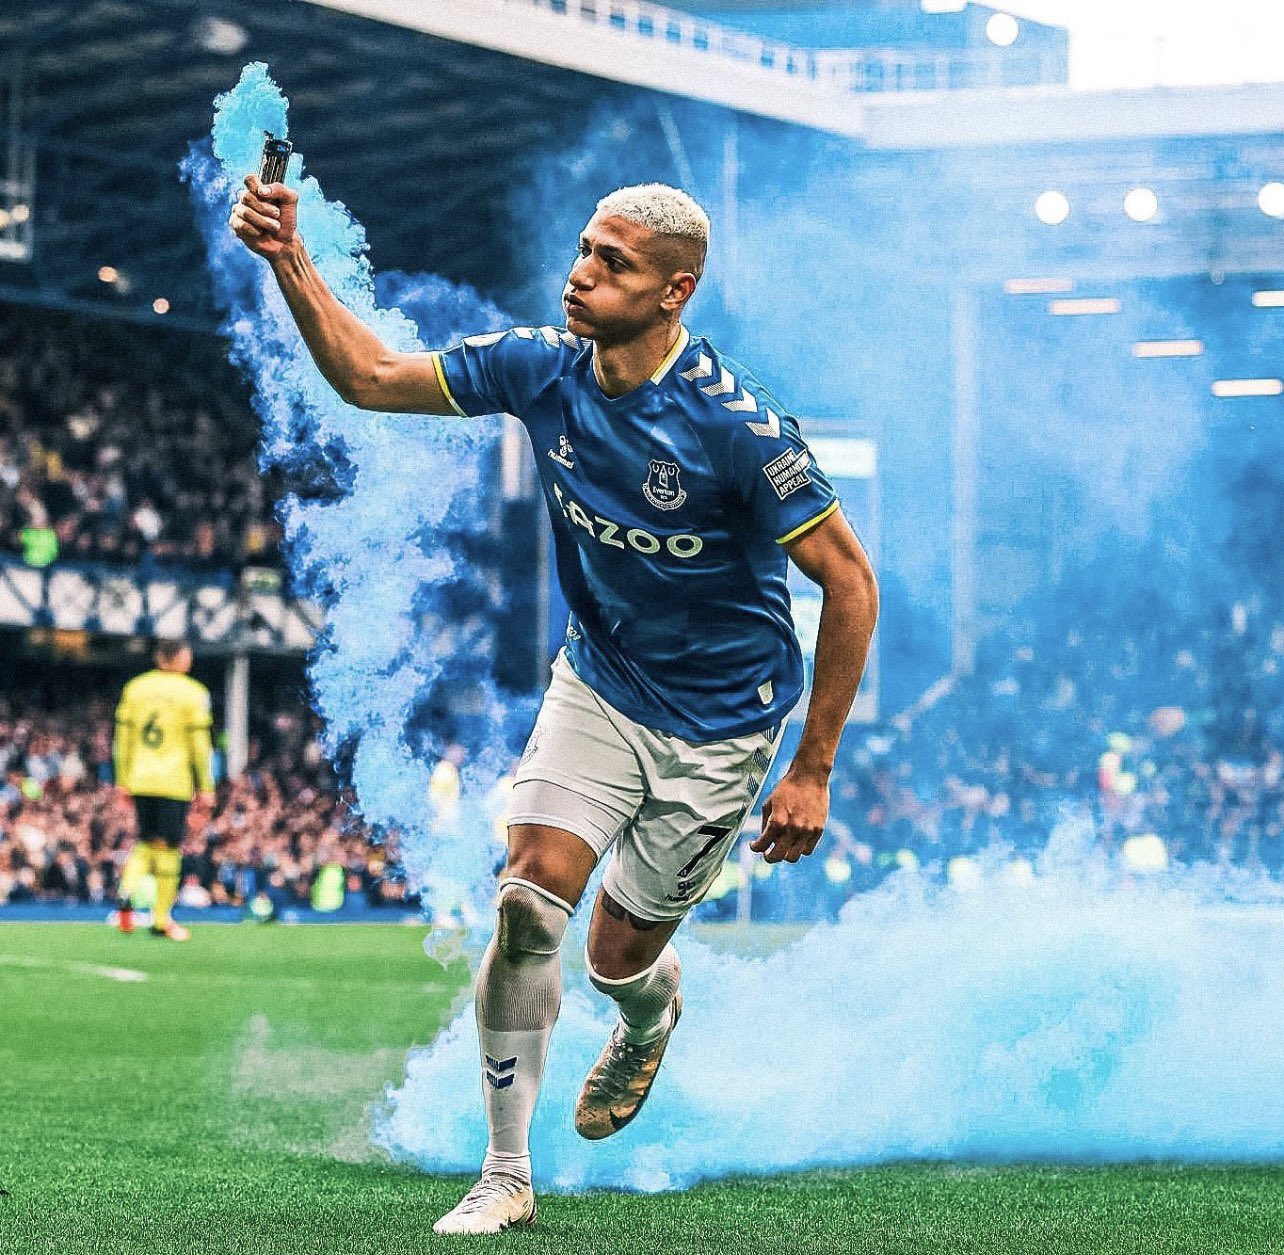 Richarlison Andrade was an unusual year, very difficult. Although we know we have escaped an even worse scenario, there are several lessons for the future. Everton is a giant